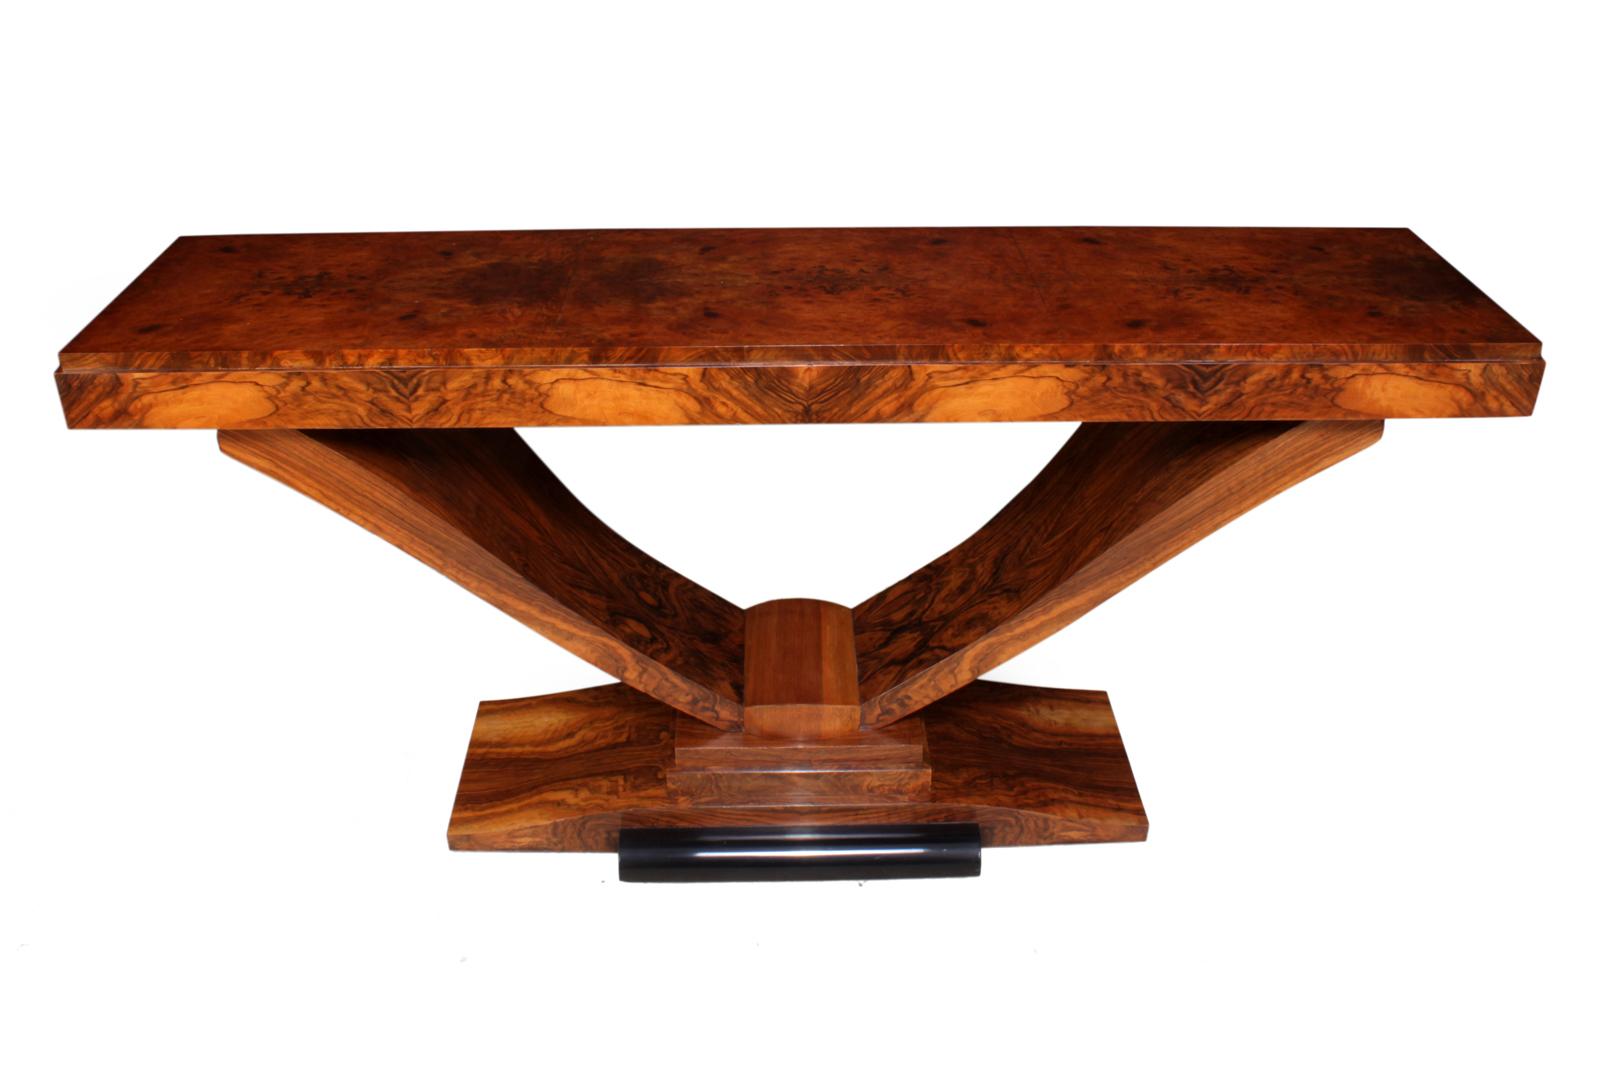 Italian Art Deco walnut console table, circa 1930
A fine Art Deco walnut console table produced in Italy in the 1930s.It has been professionally restored and French polished by hand, It is in excellent condition with the odd age related mark, the